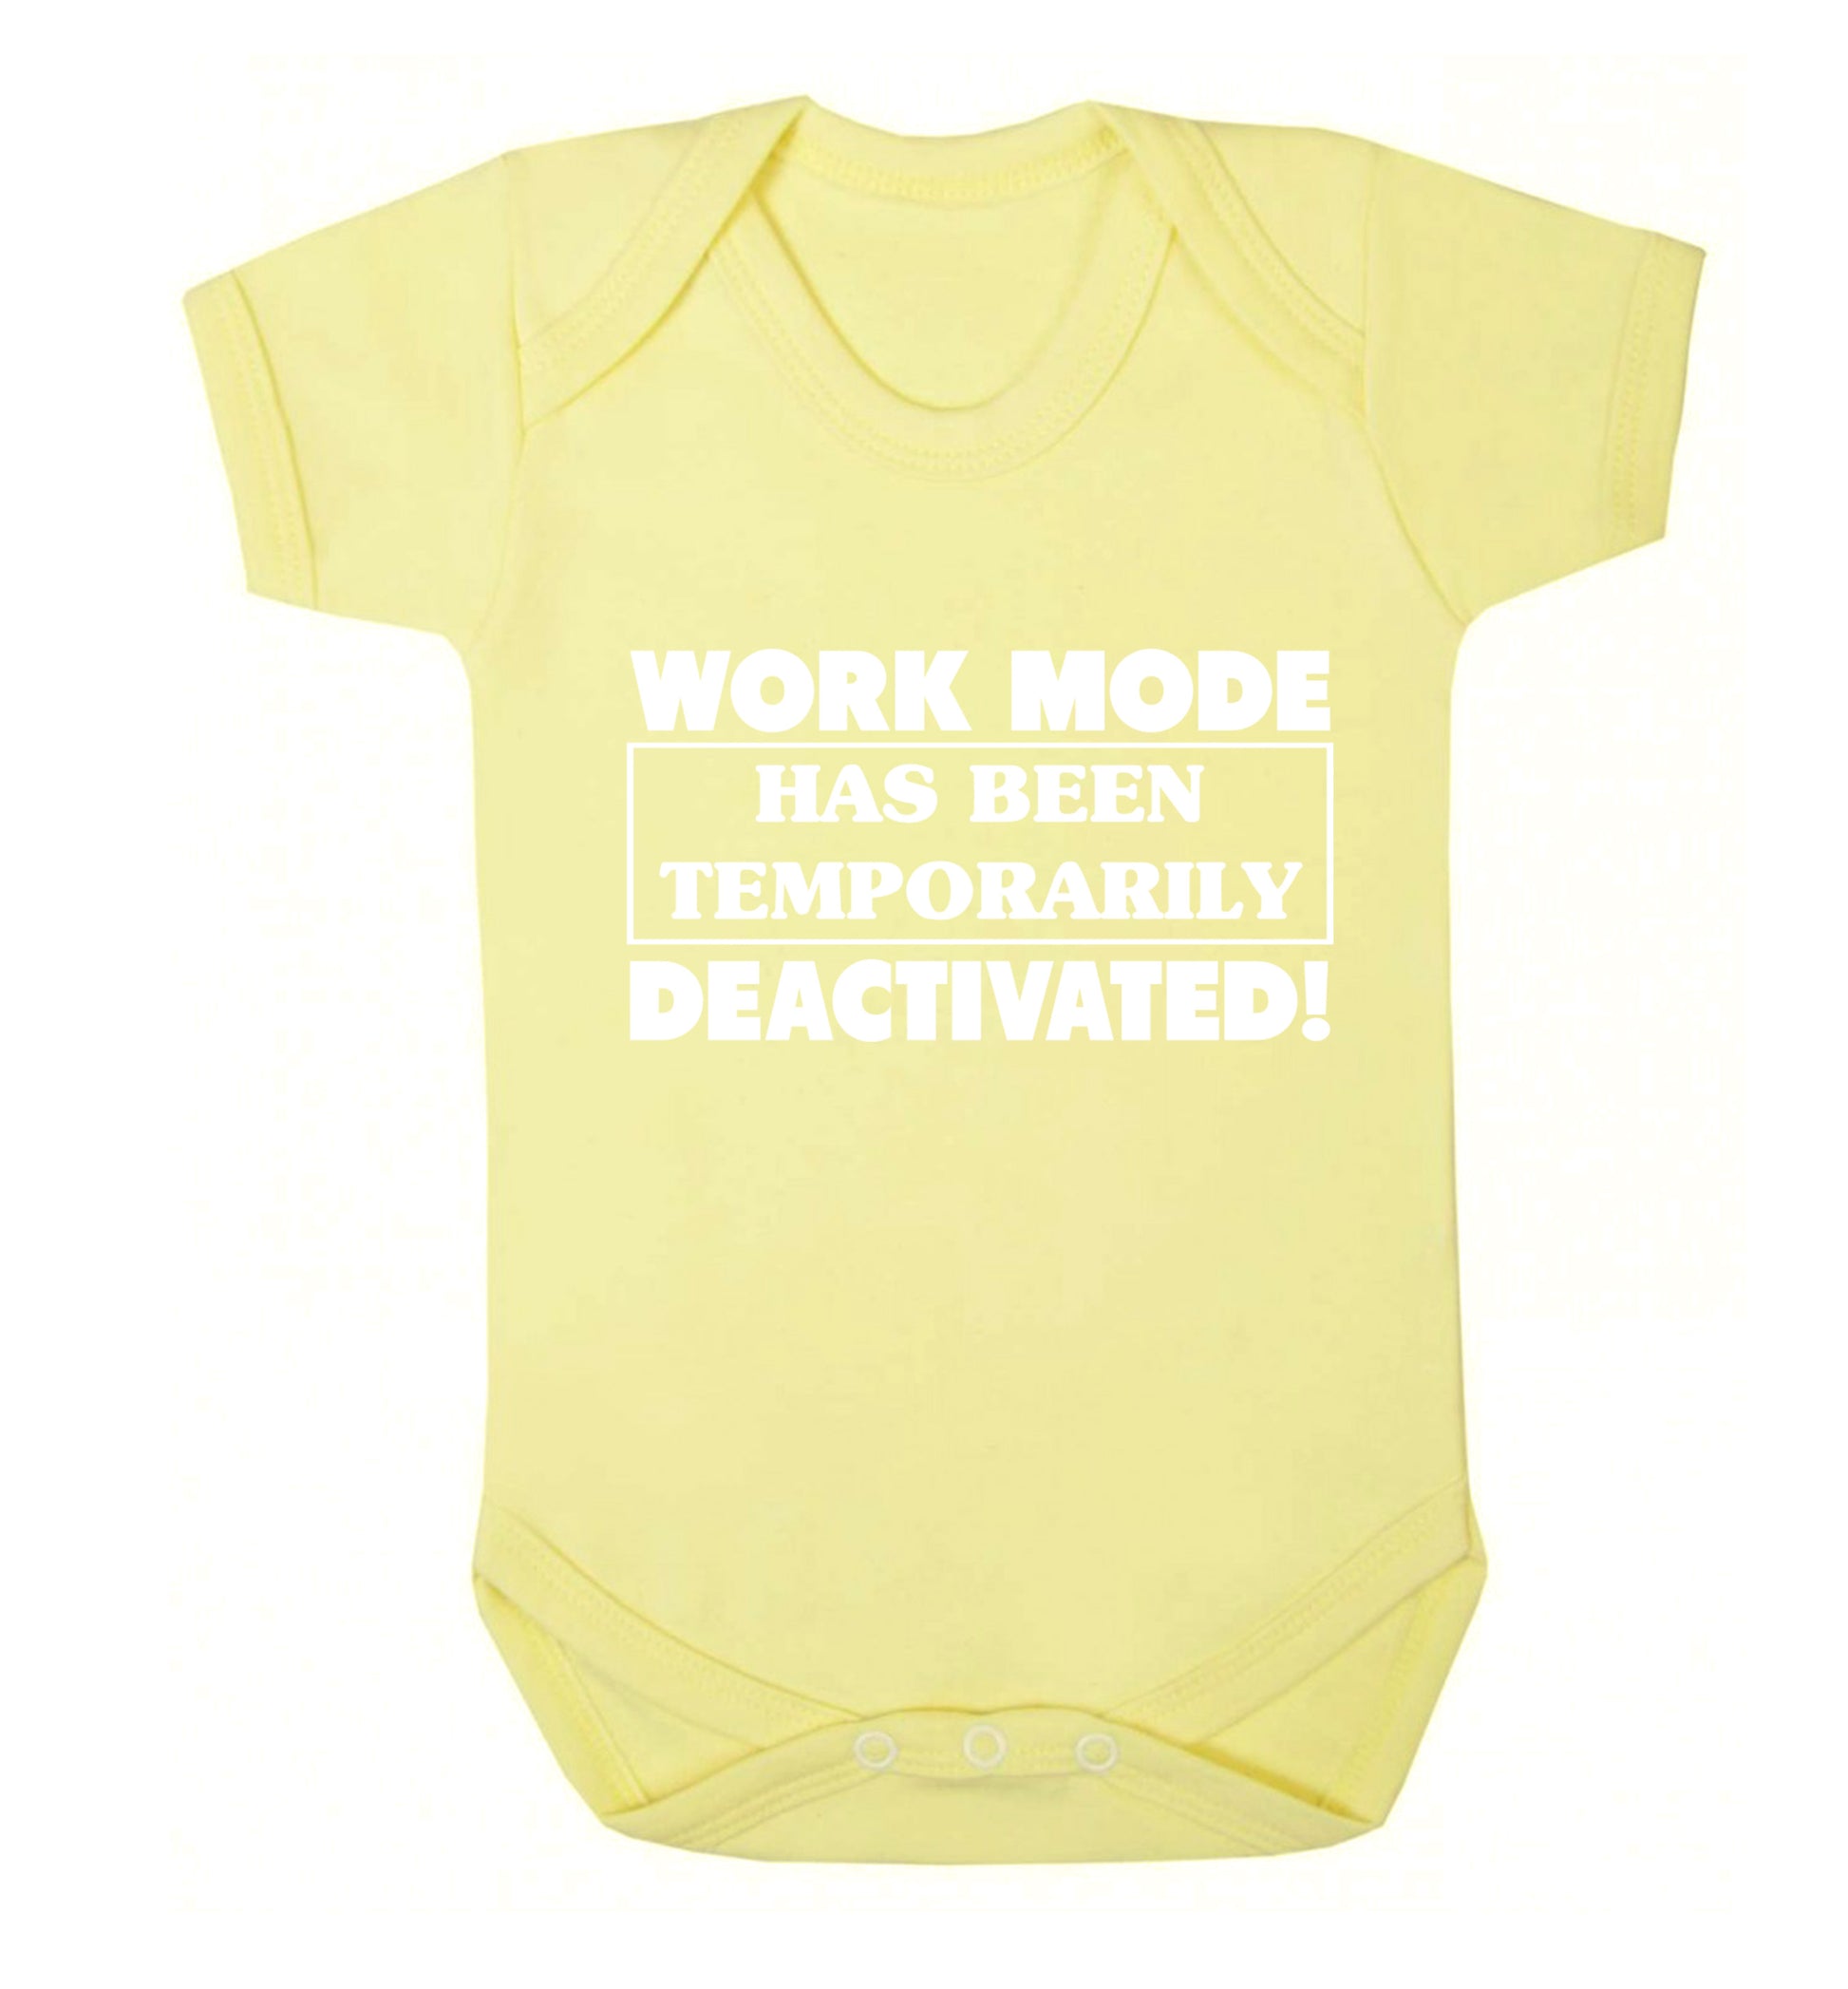 Work mode has now been temporarily deactivated Baby Vest pale yellow 18-24 months